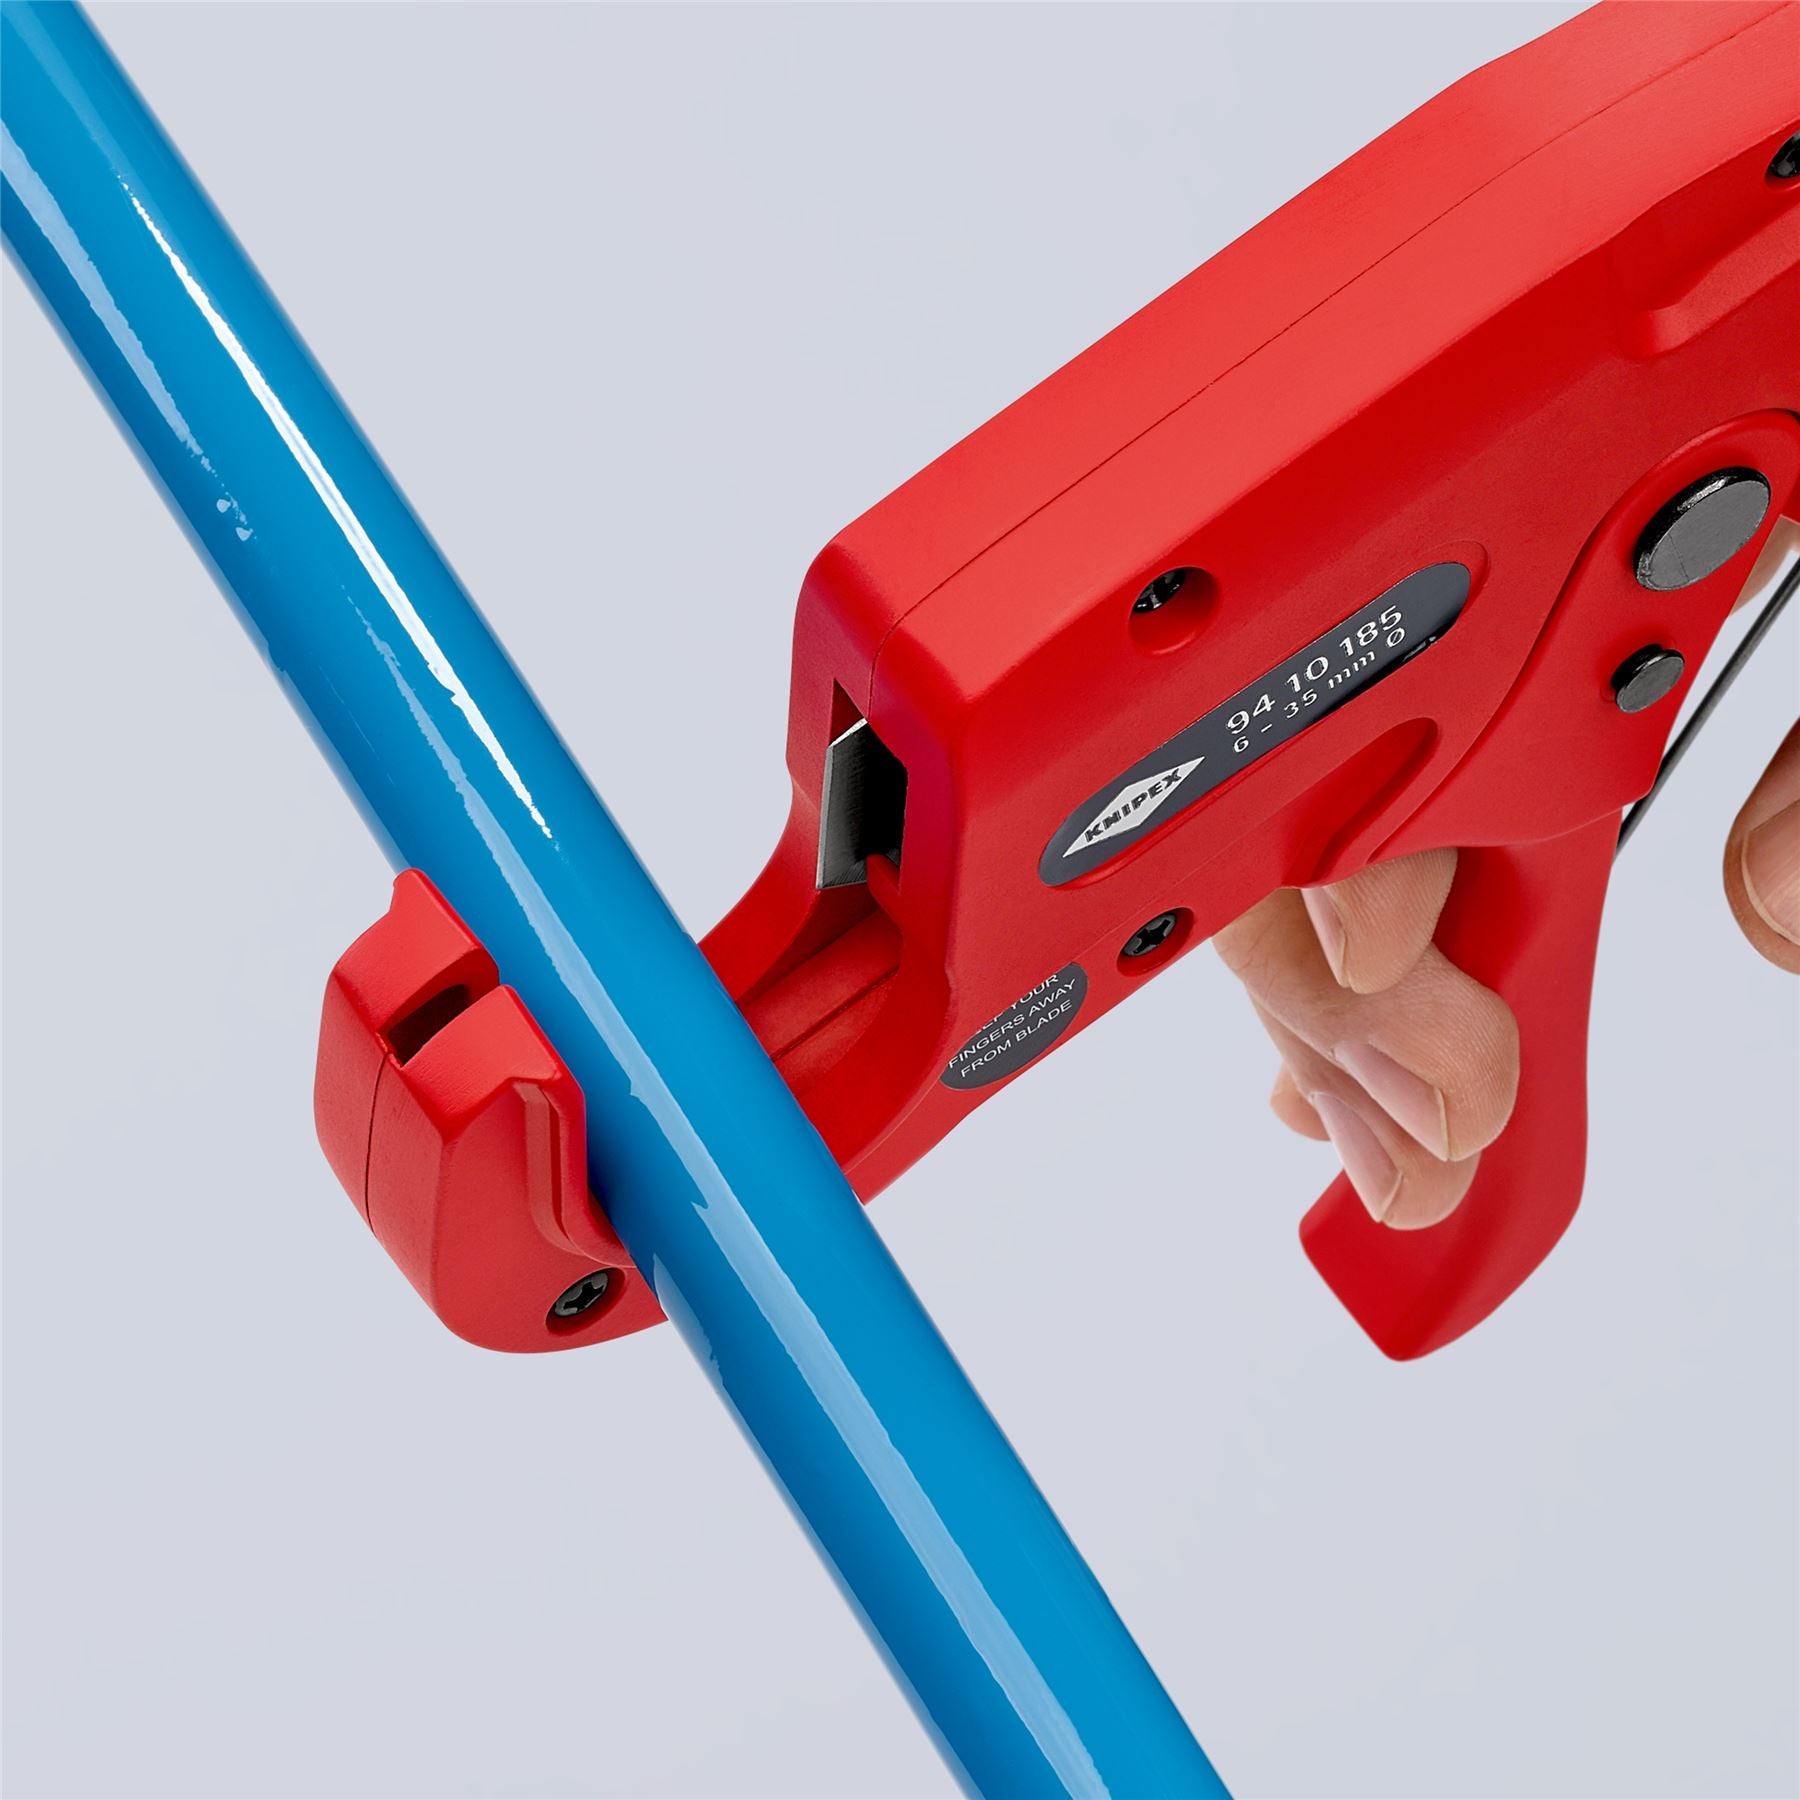 KNIPEX Pipe Cutter for Plastic Conduit Pipes Electrical Installation Work 185mm 6-35mm Capacity 94 10 185